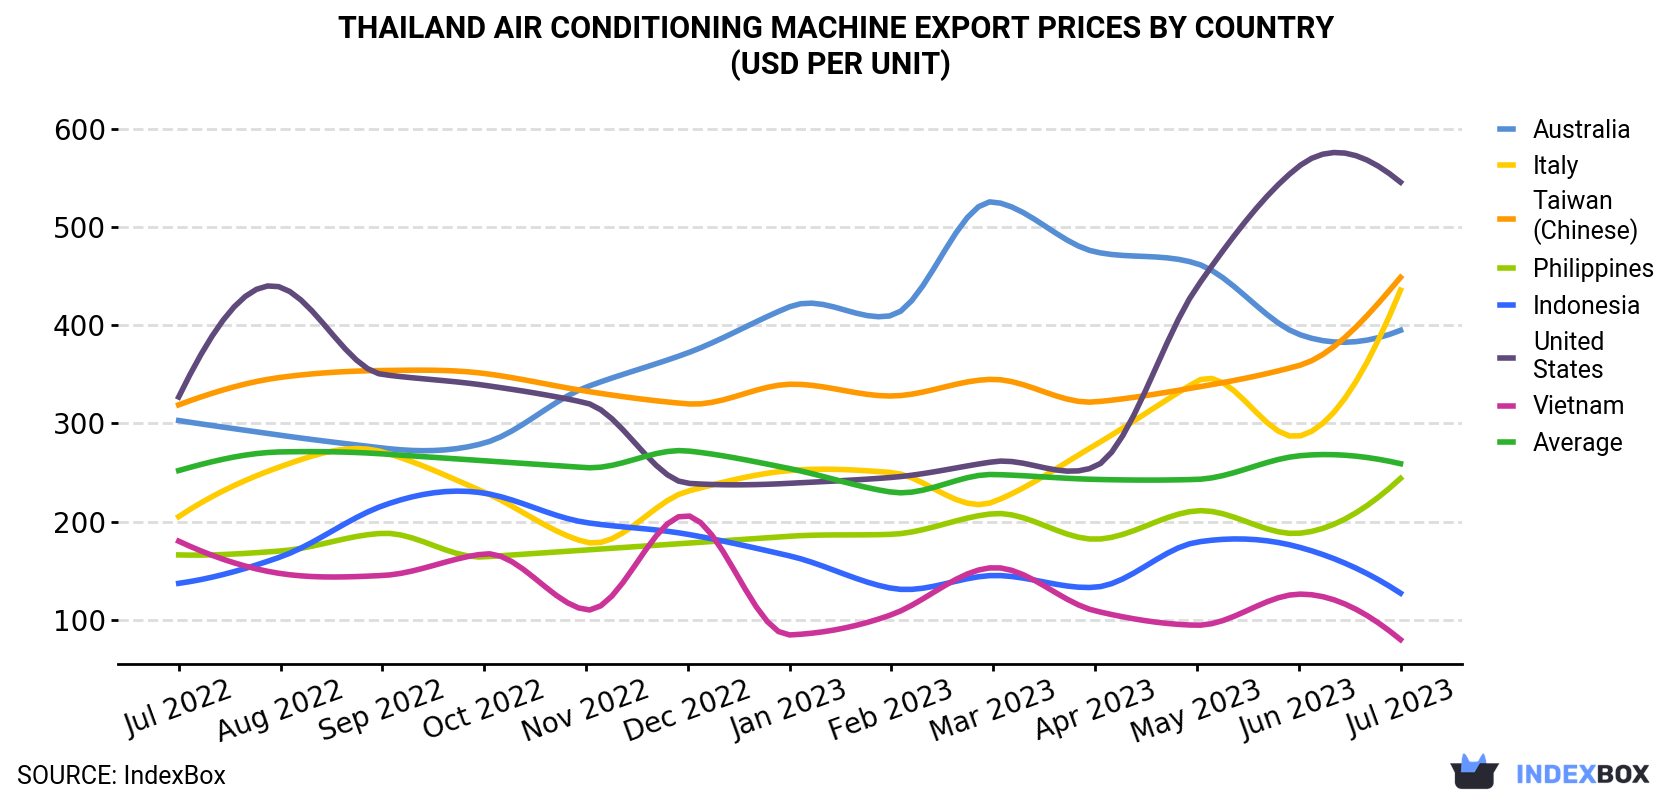 Thailand Air Conditioning Machine Export Prices By Country (USD Per Unit)